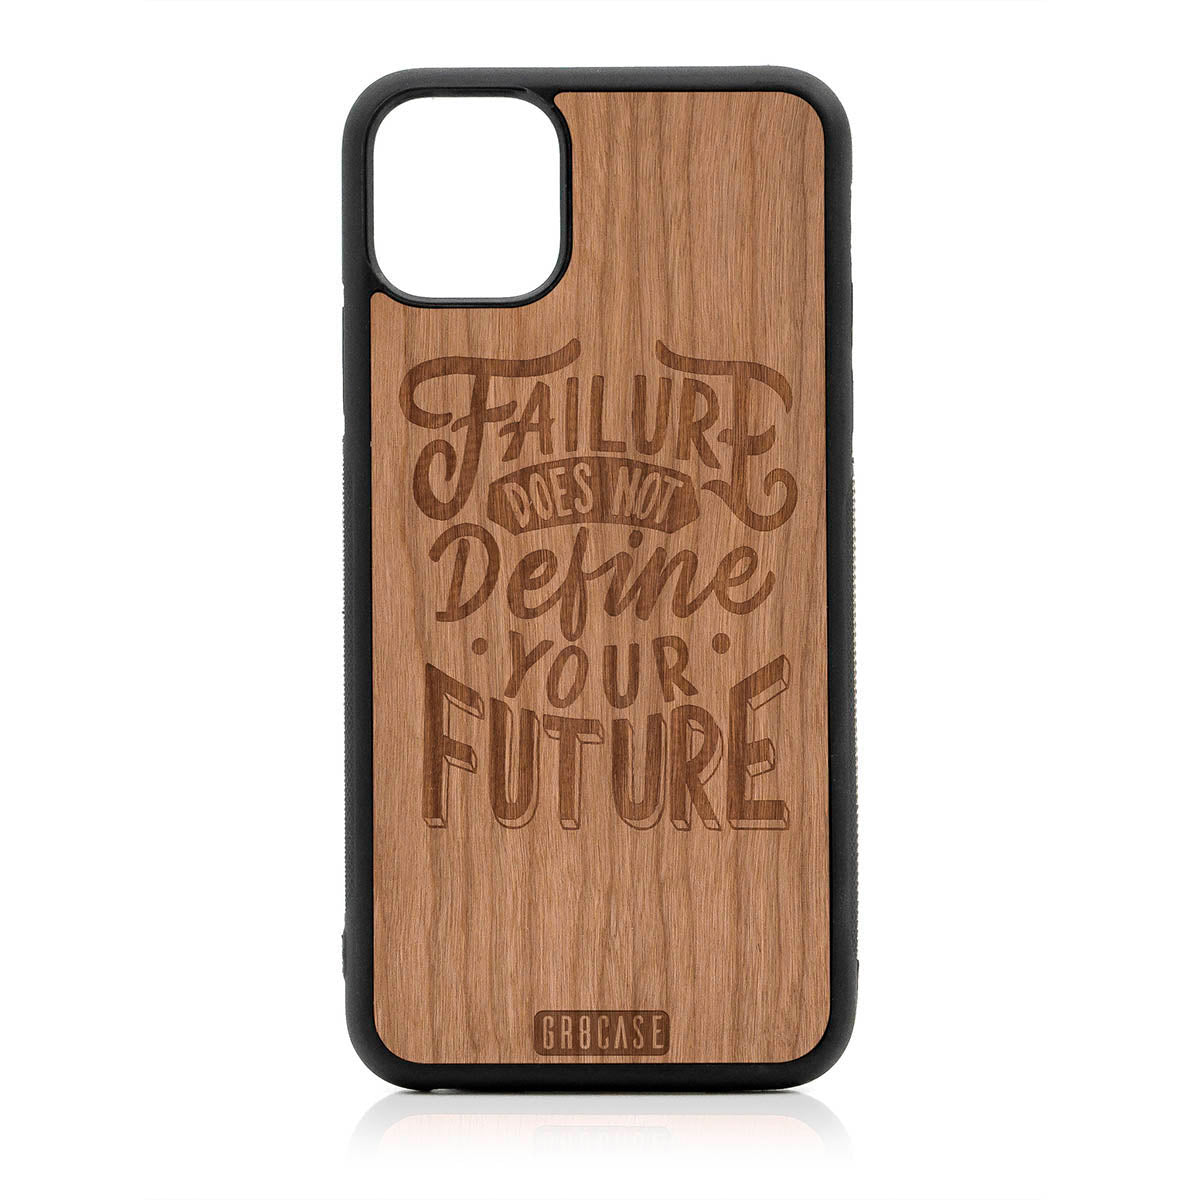 Failure Does Not Define You Future Design Wood Case For iPhone 11 Pro Max by GR8CASE